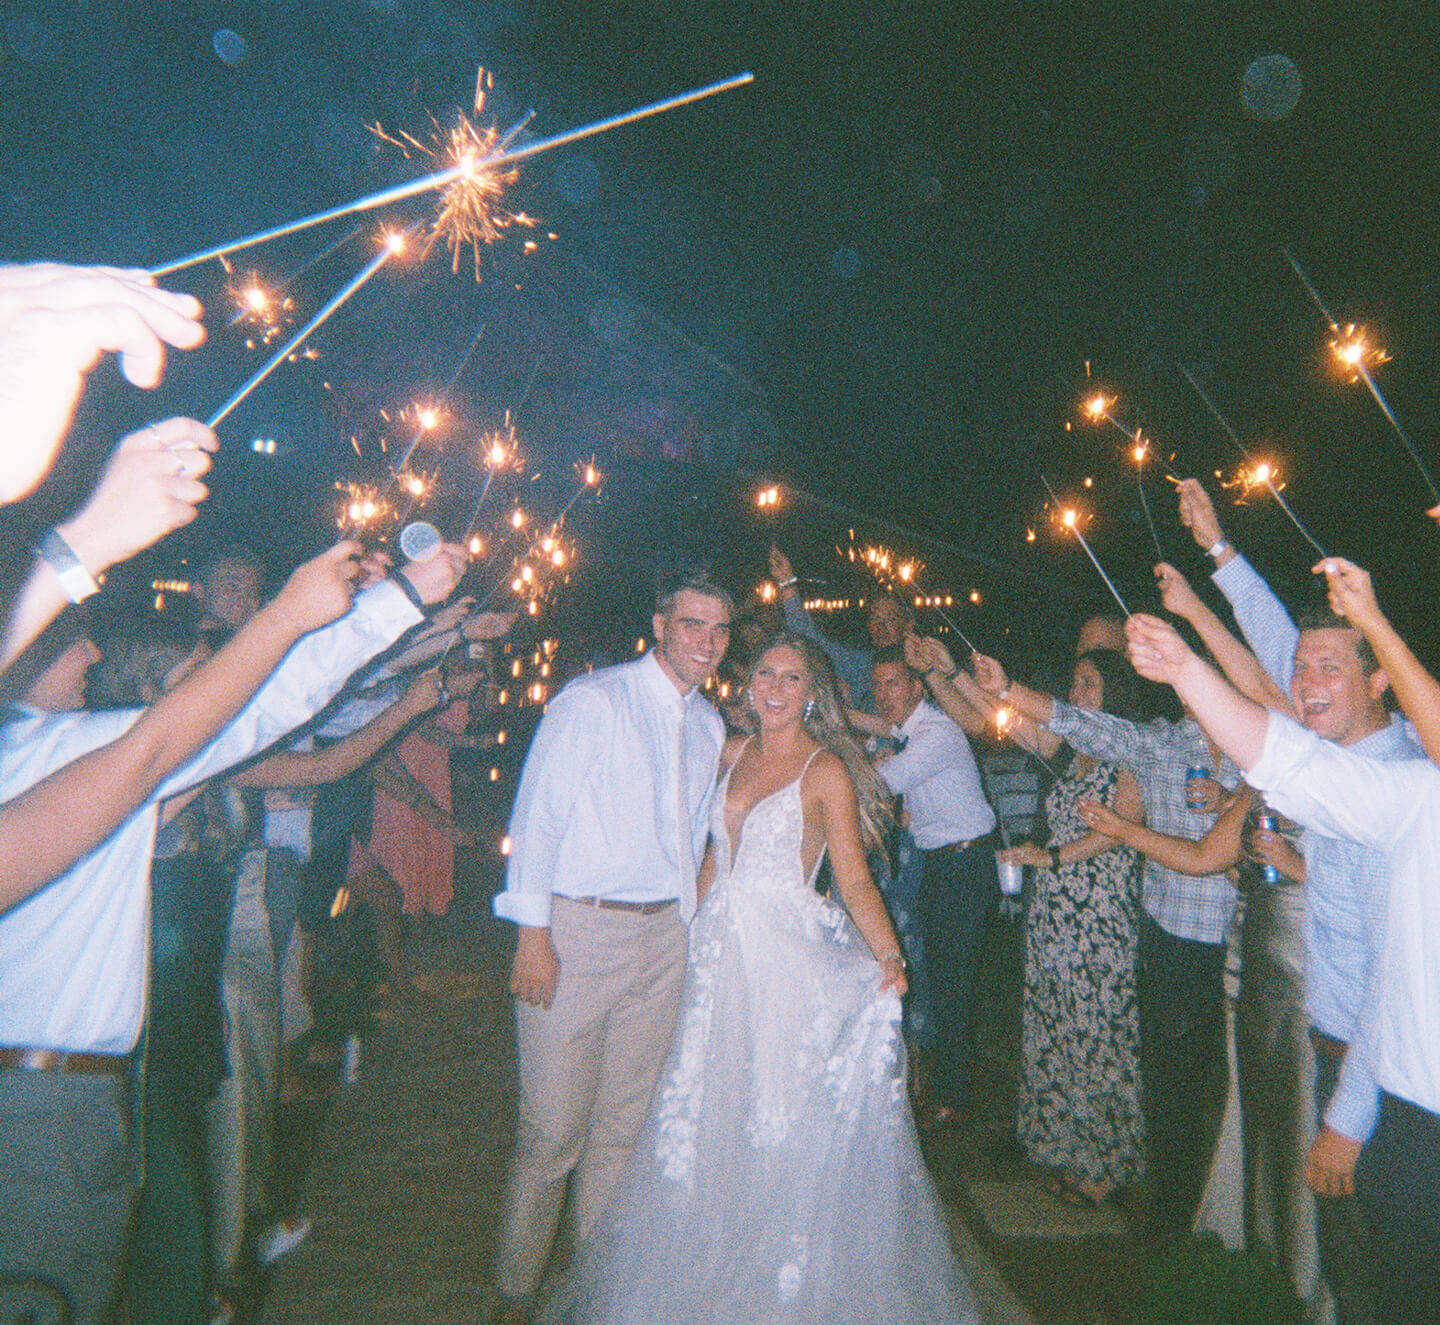 Wedding sparkling send off with sparklers in air as bride and groom walk